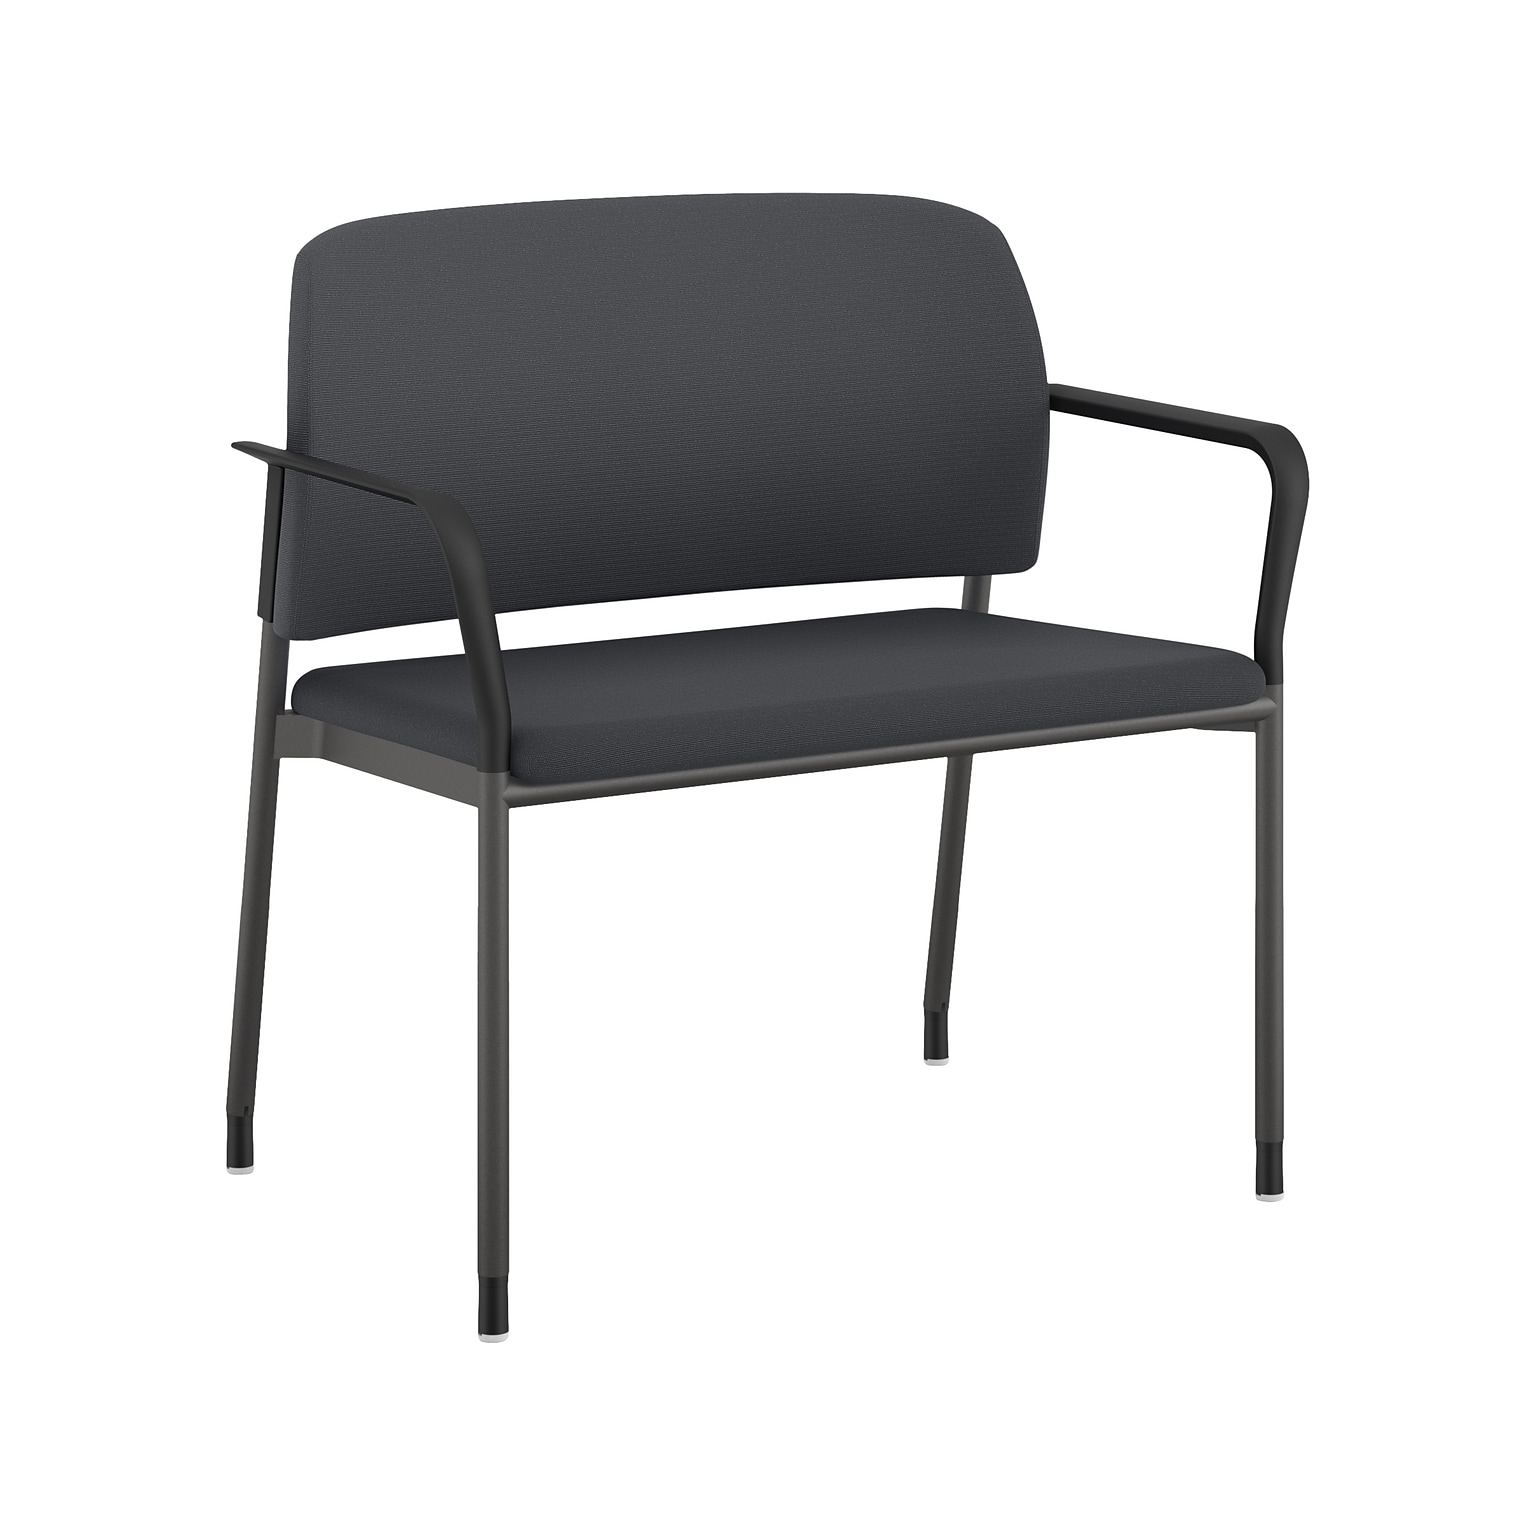 HON Accommodate Vinyl Upholstered Bariatric Stacking Chair, Dark Gray/Textured Charcoal (HSB50.F.E.SX23.P7A)